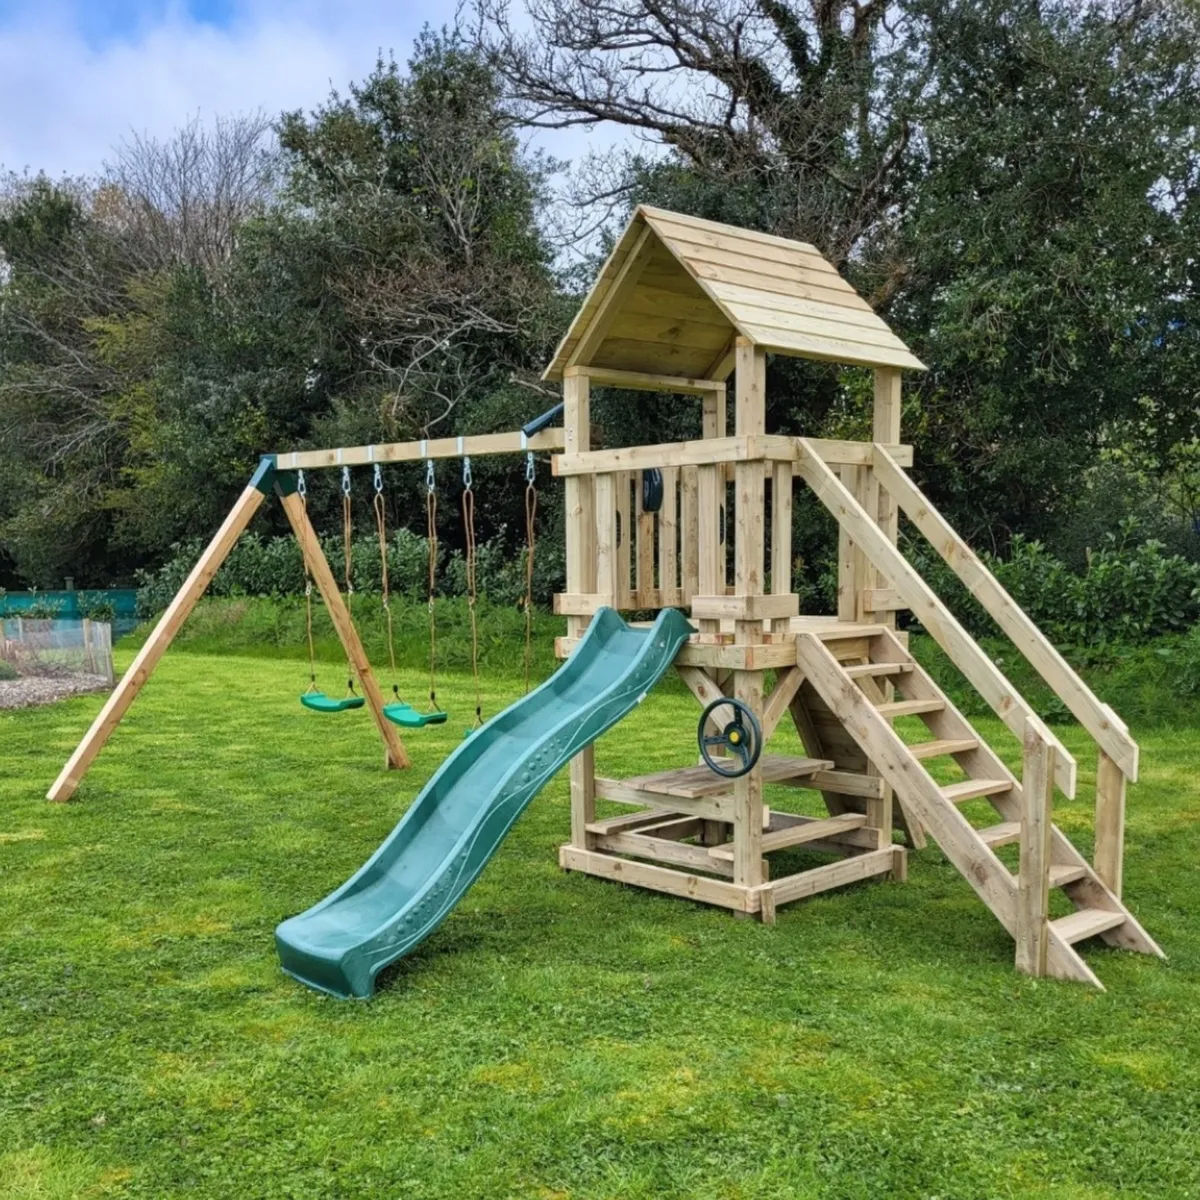 Playhouse Swing and Slide 💥NATIONWIDE DELIVERY💥 - Image 1